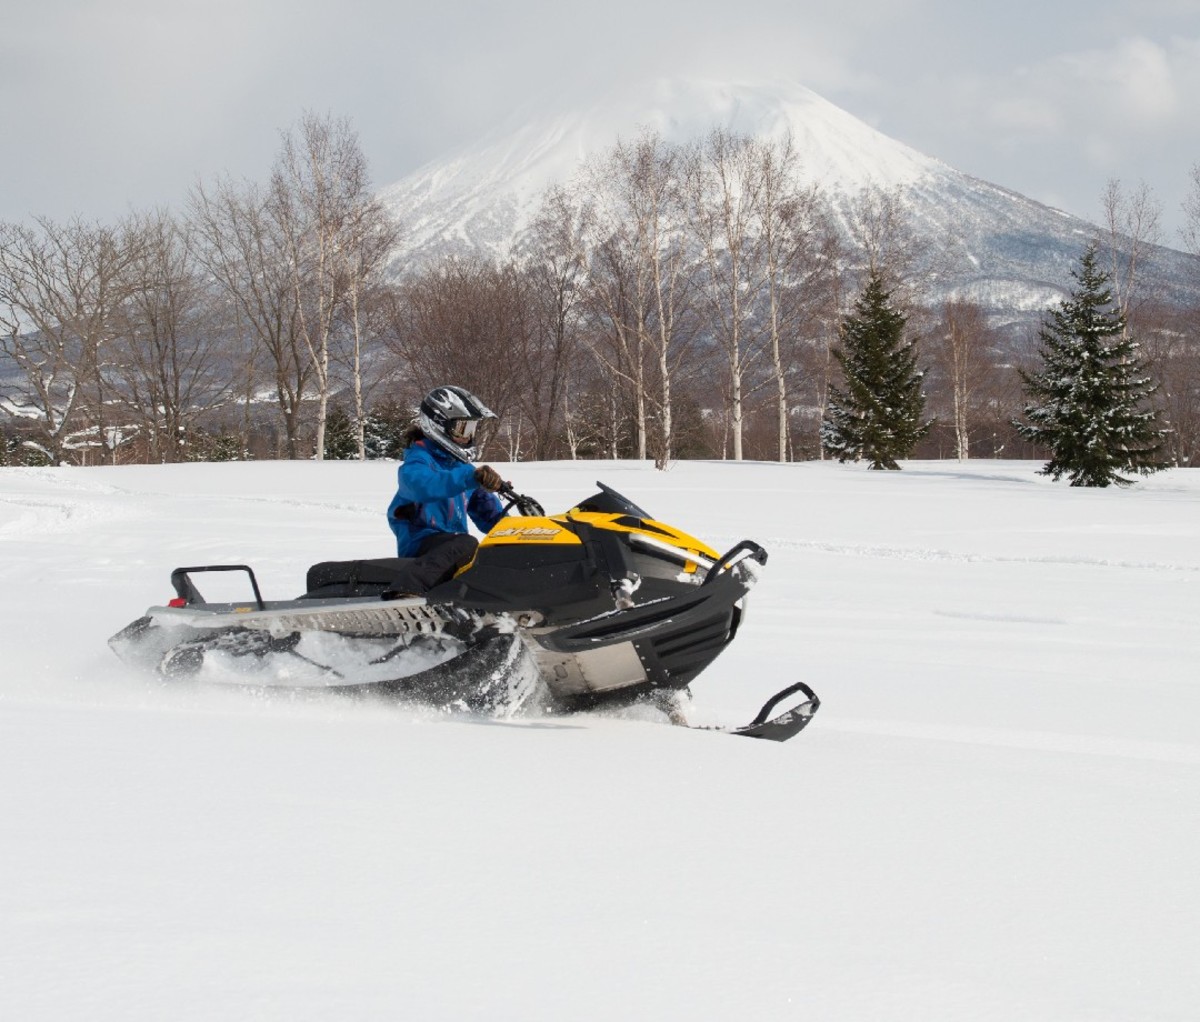 Snowmobiler riding on a snowy flat in Hokkaido, Japan with conical volcanic peak Mount Yotei in the background